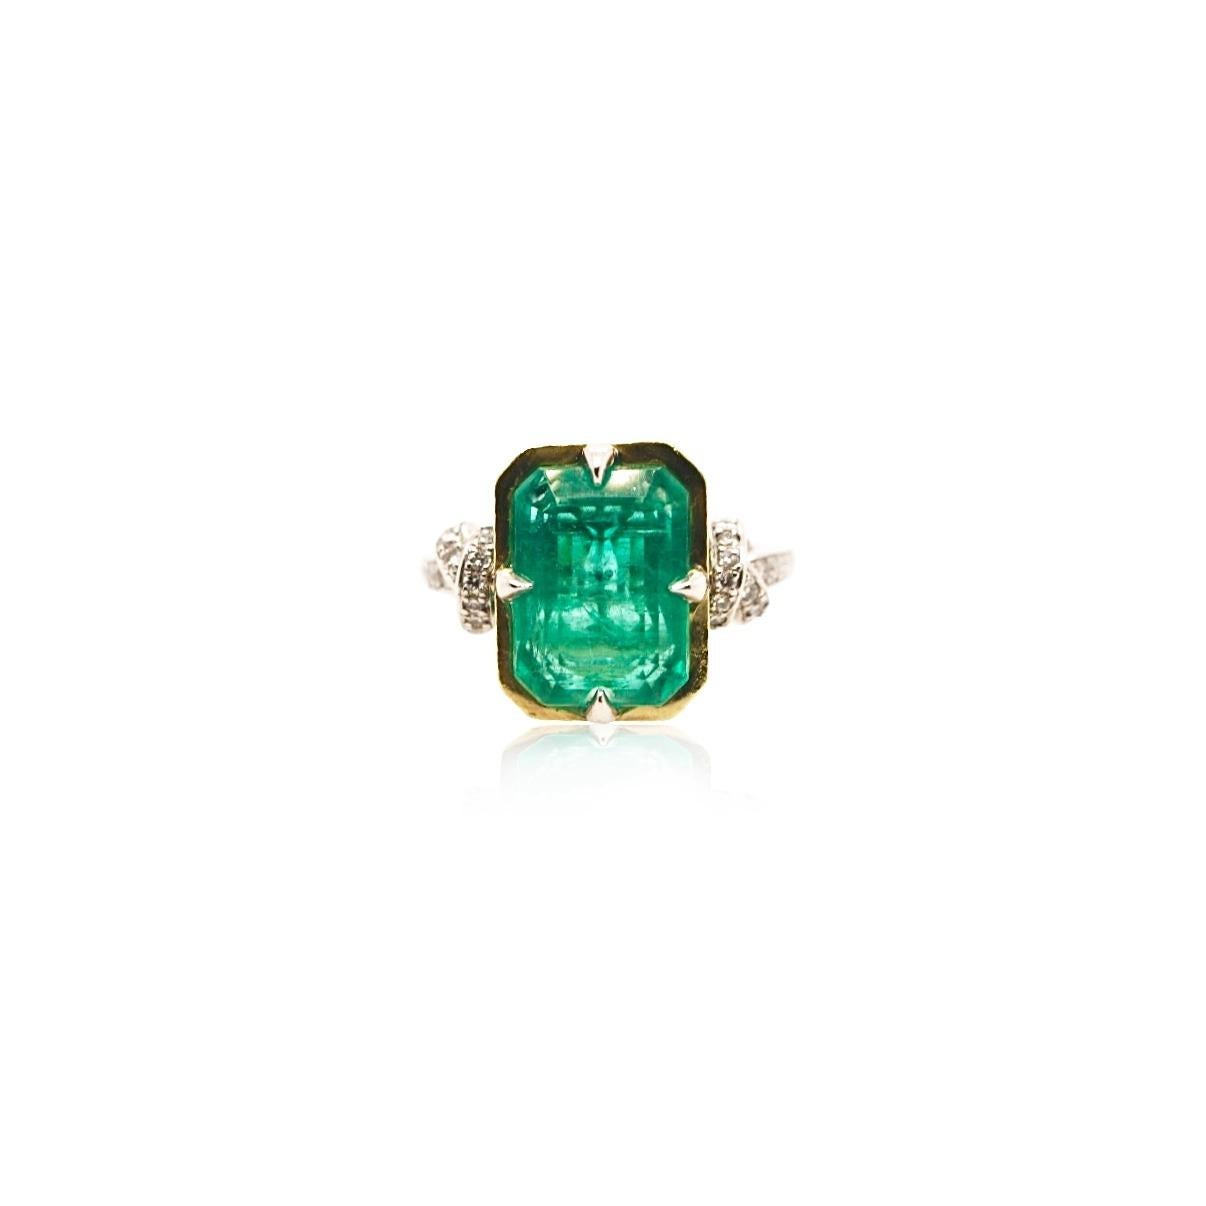 5.79 Carat Zambian Emerald in Forget Me Knot Style Ring with Diamonds 6